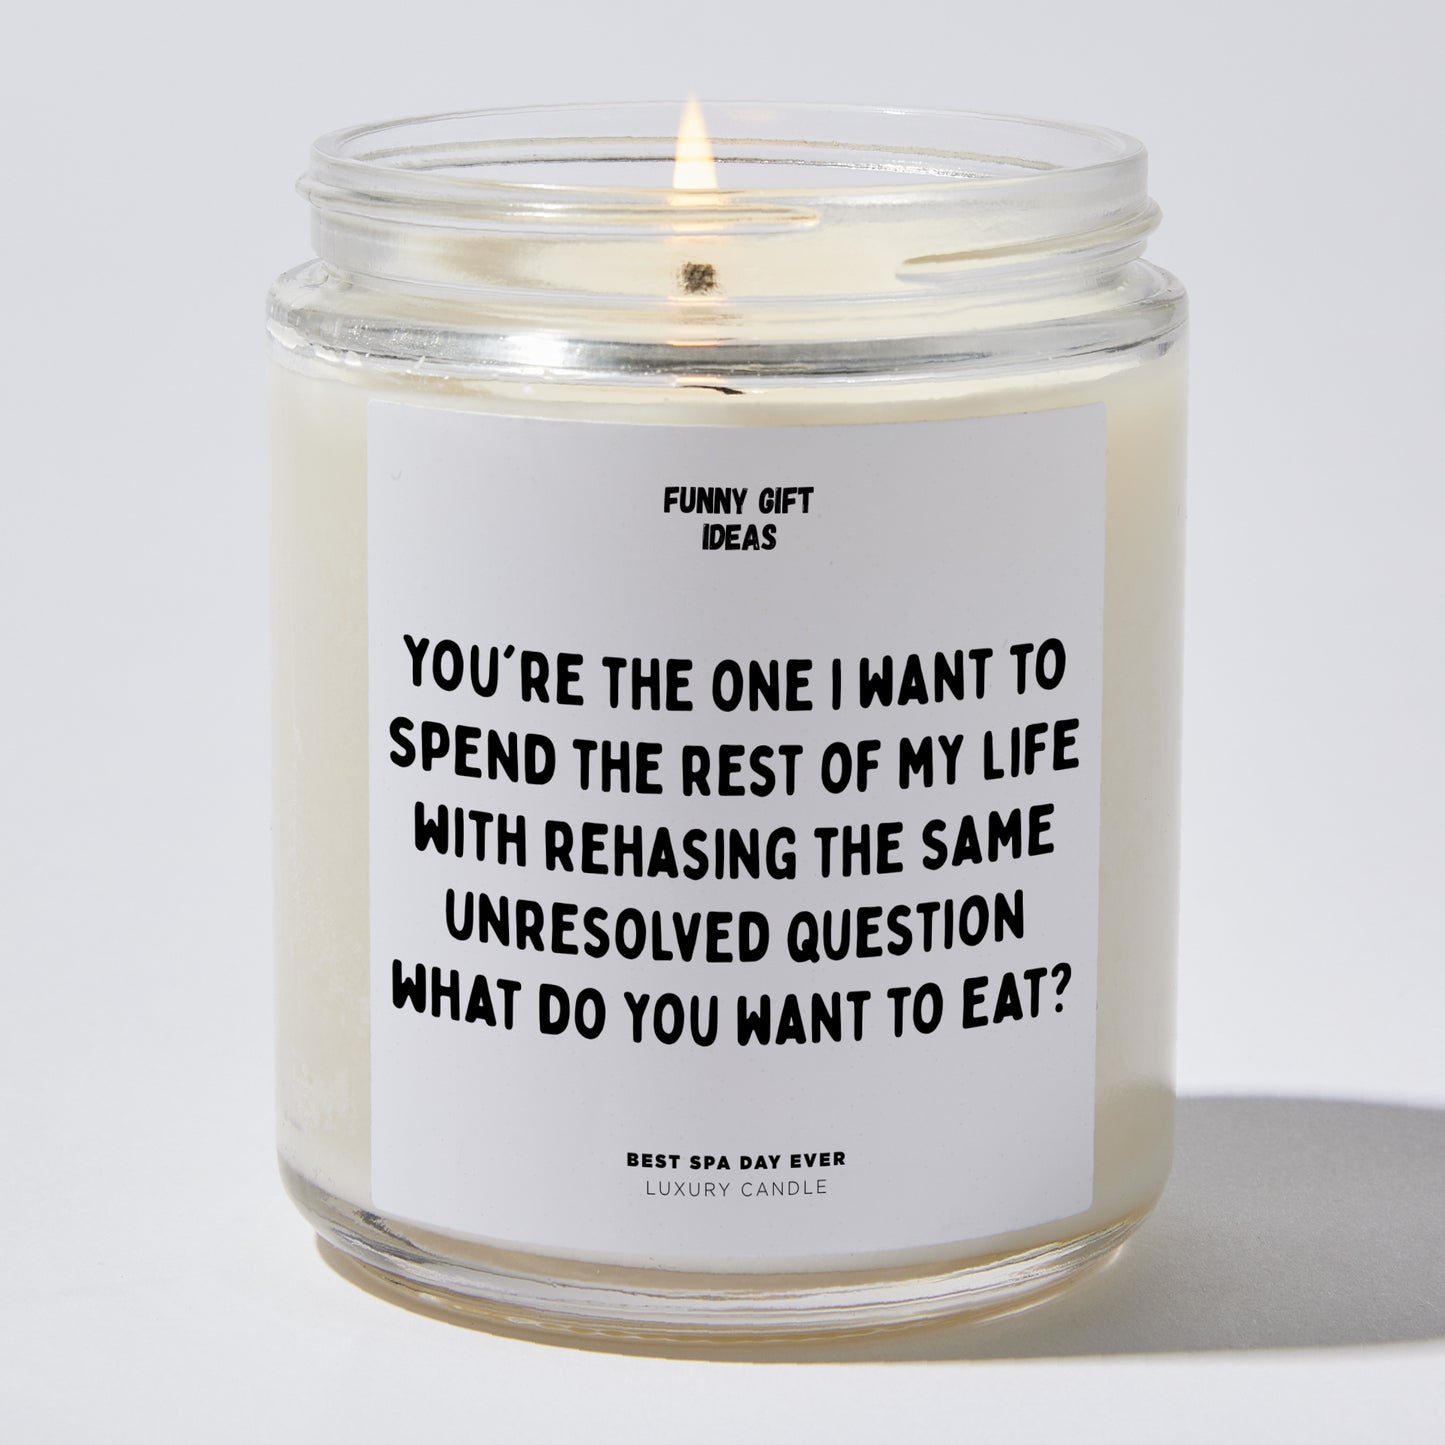 Anniversary Present - You're the One I Want to Spend the Rest of My Life With Rehasing the Same Unresolved Question. What Do You Want to Eat? - Candle